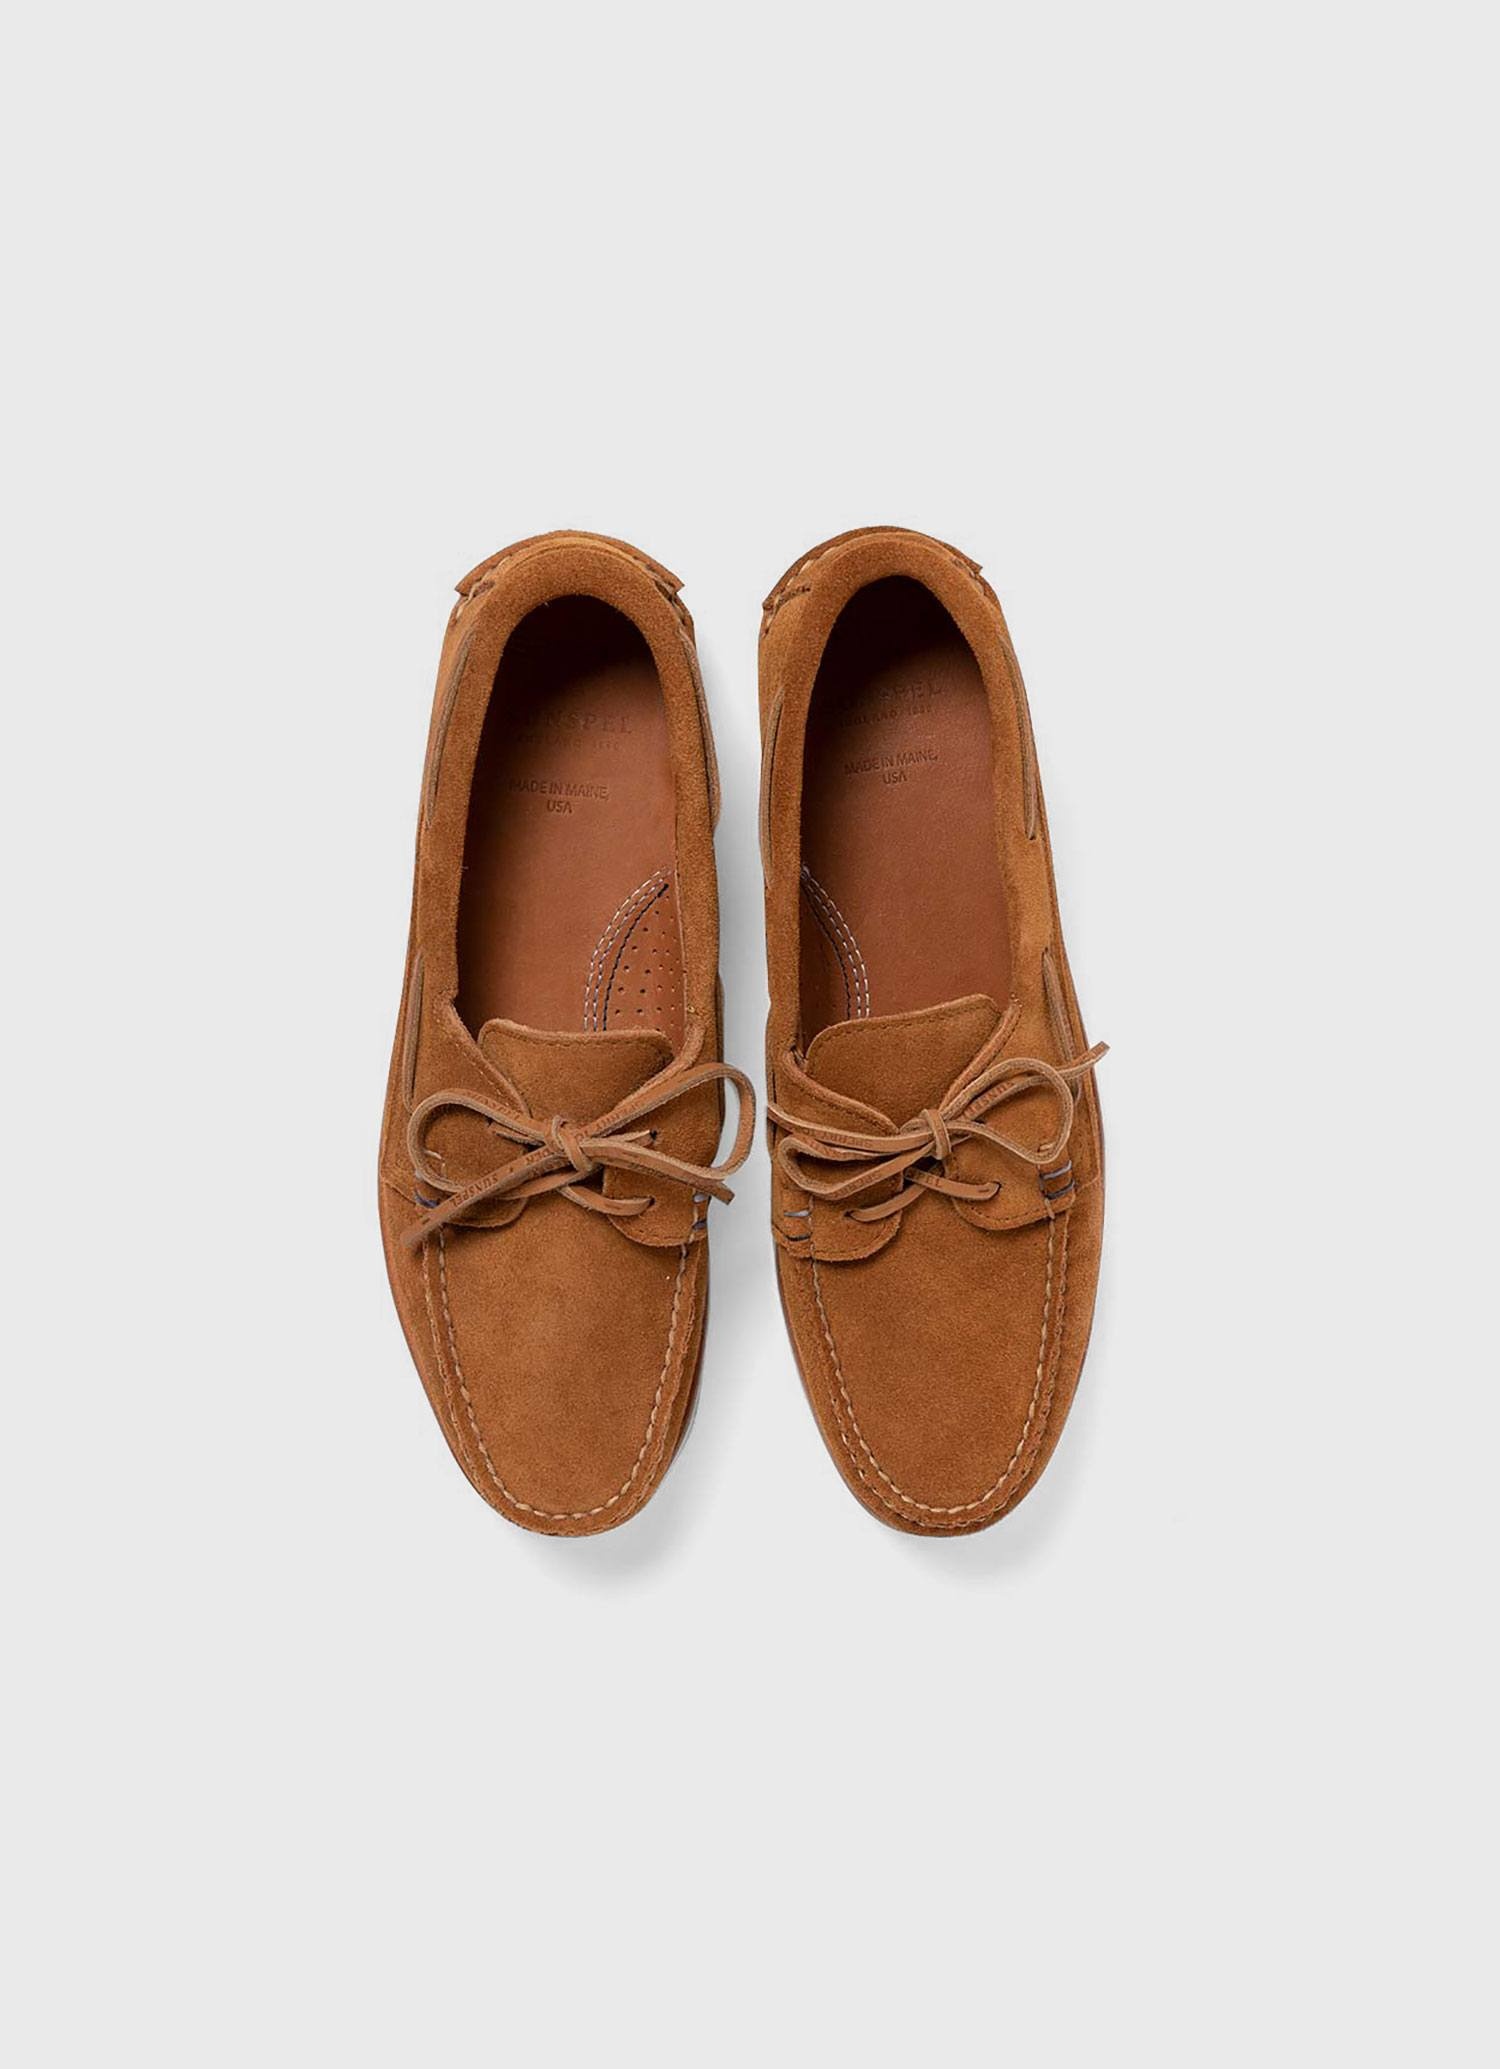 Sunspel and Sperry Suede Boat Shoe - 4